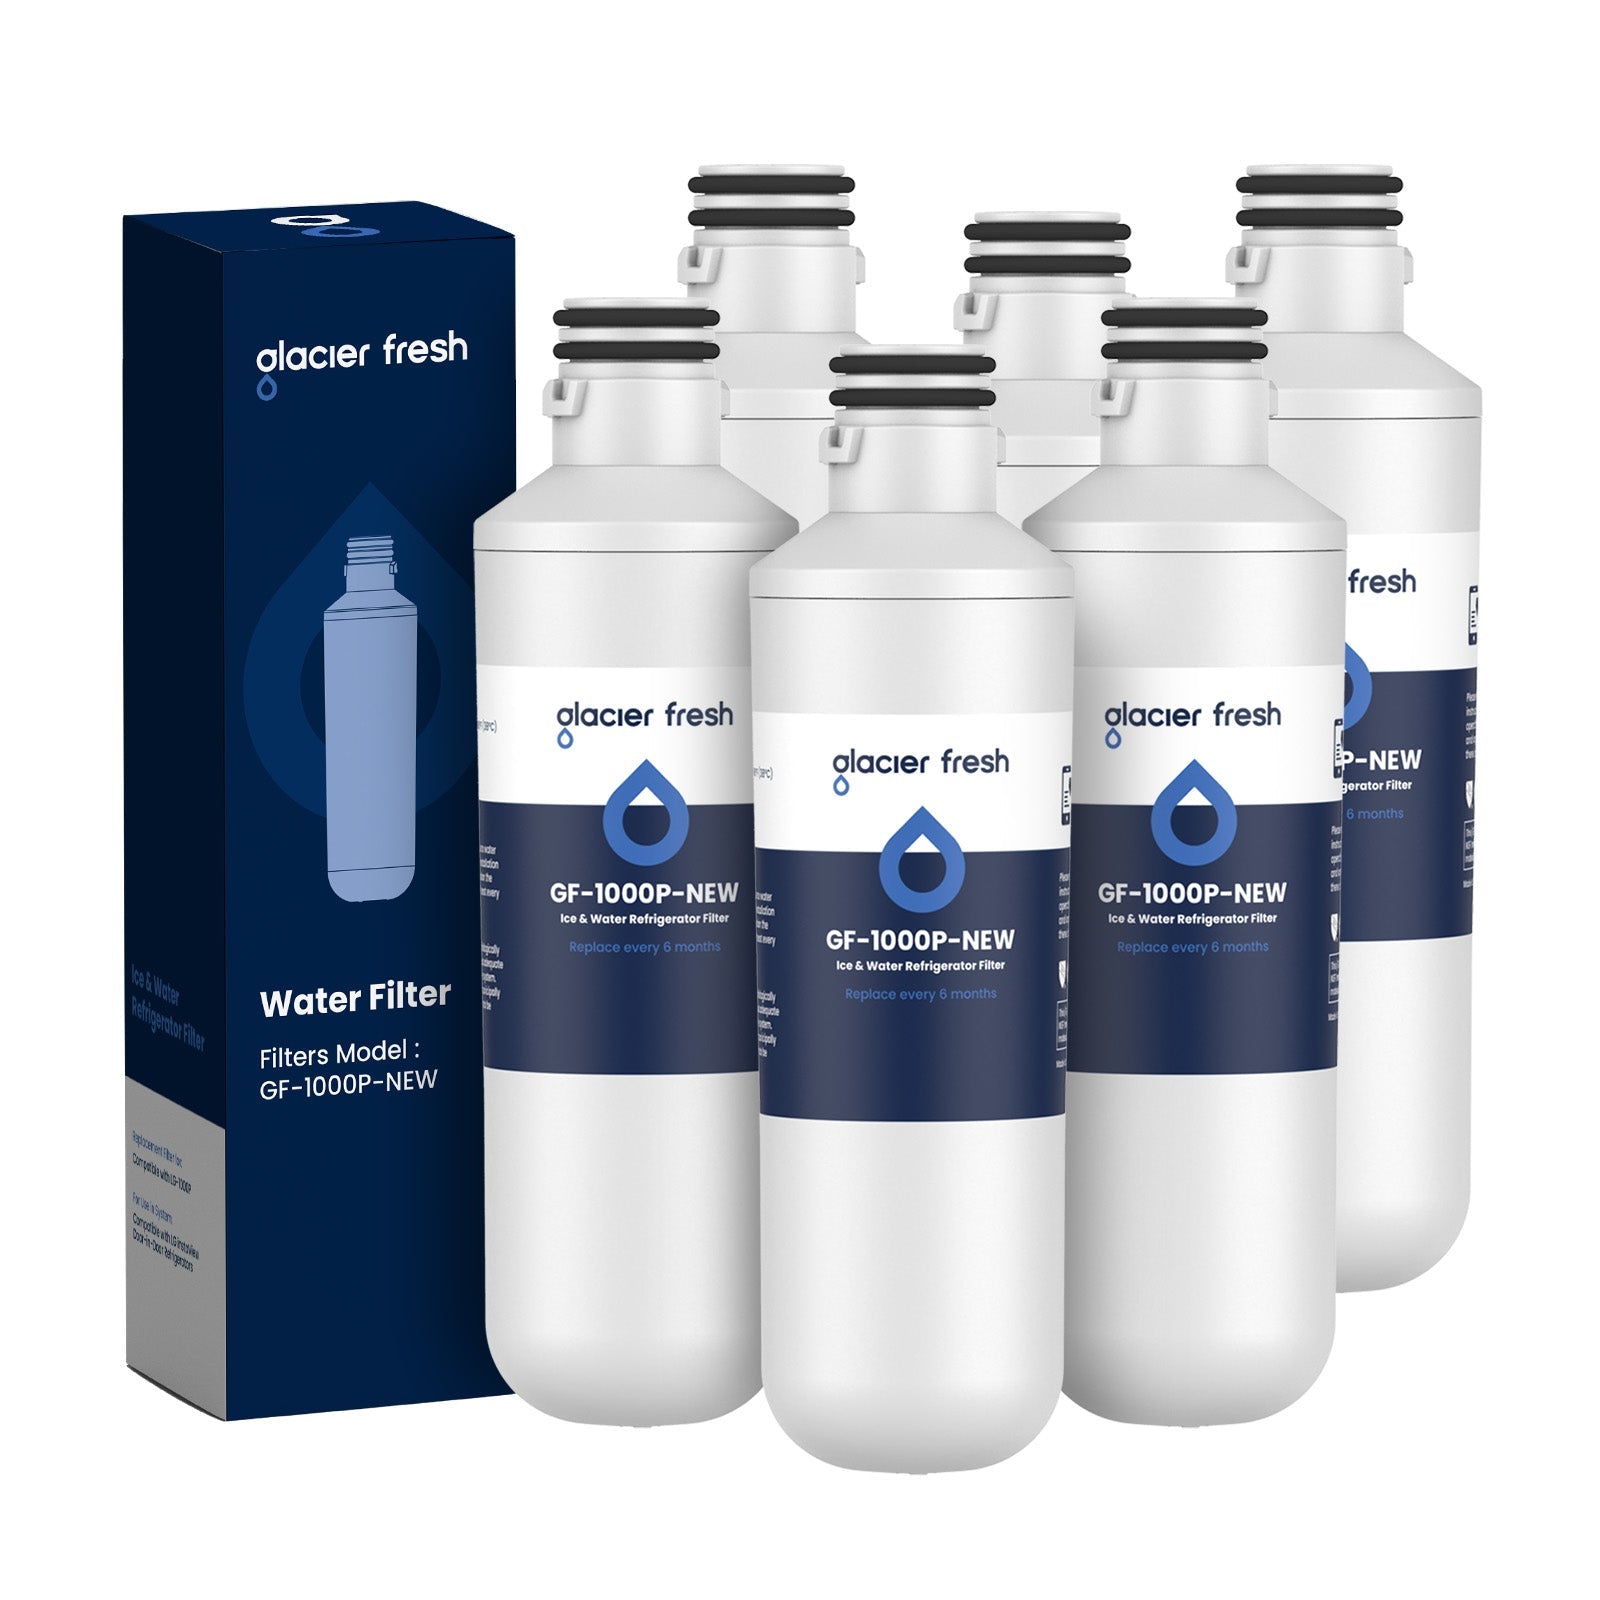 ADQ747935, ADQ74793501, MDJ64844601 Replacement Refrigerator Water Filter by Glacier Fresh, 3-Pack